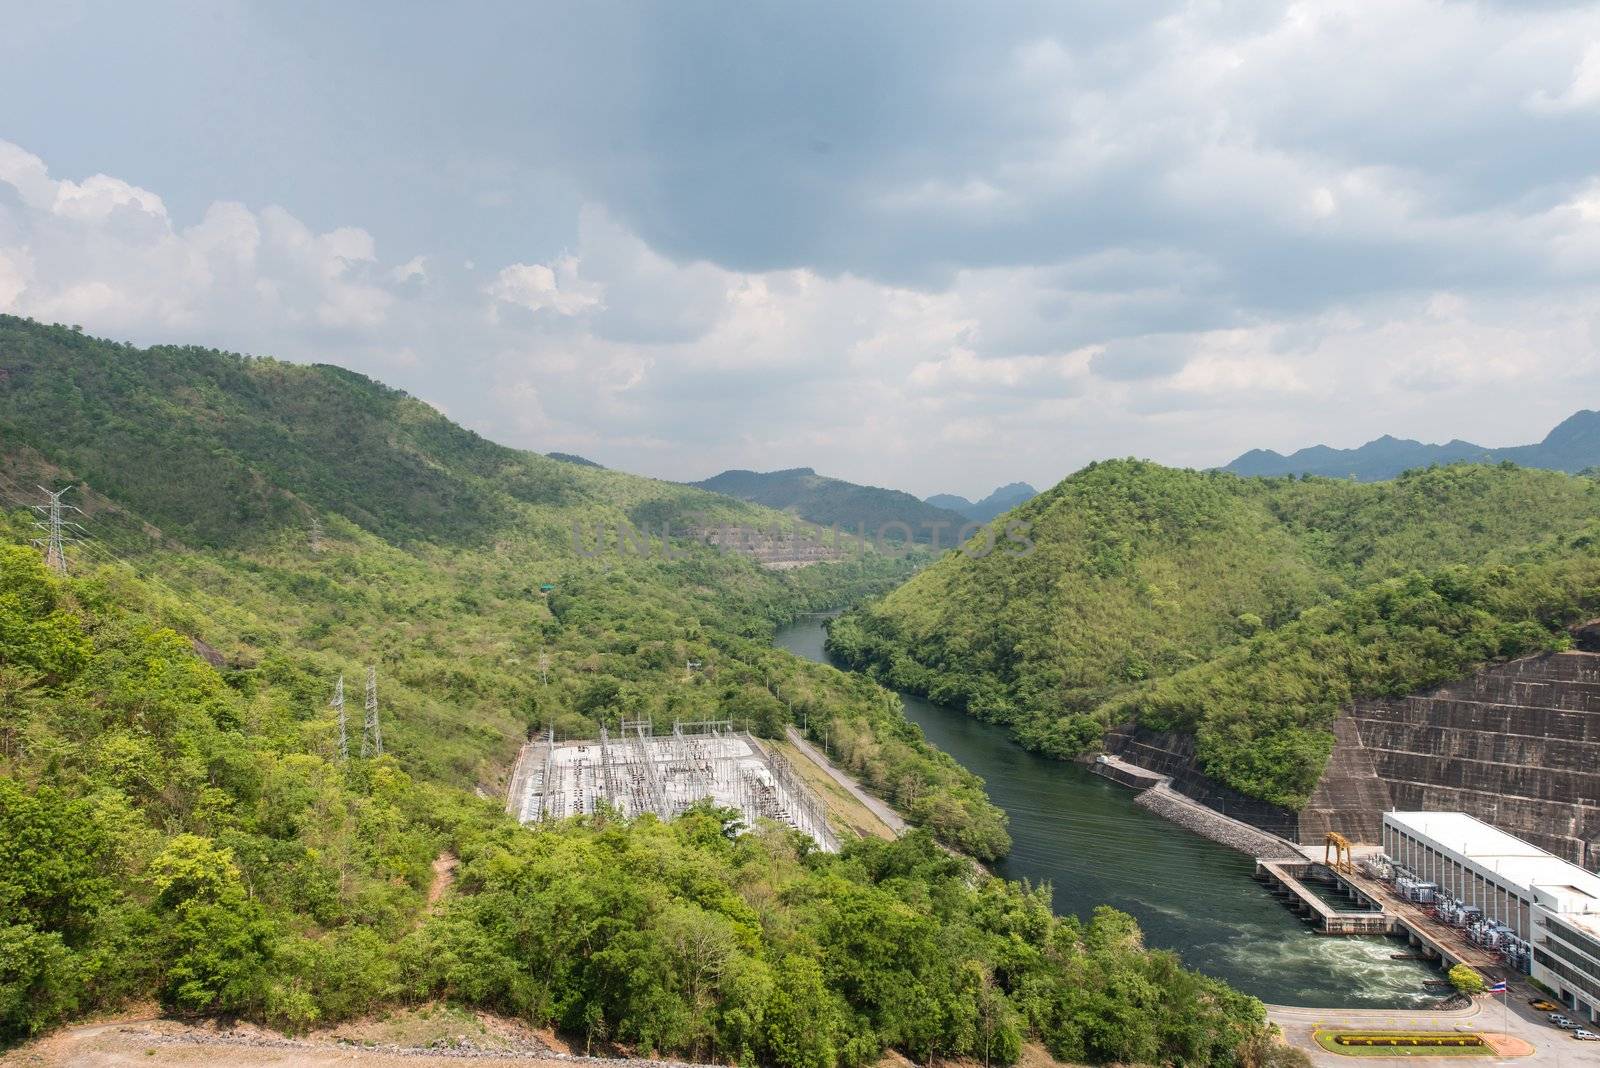 Large hydro electric dam in Thailand by sasilsolutions